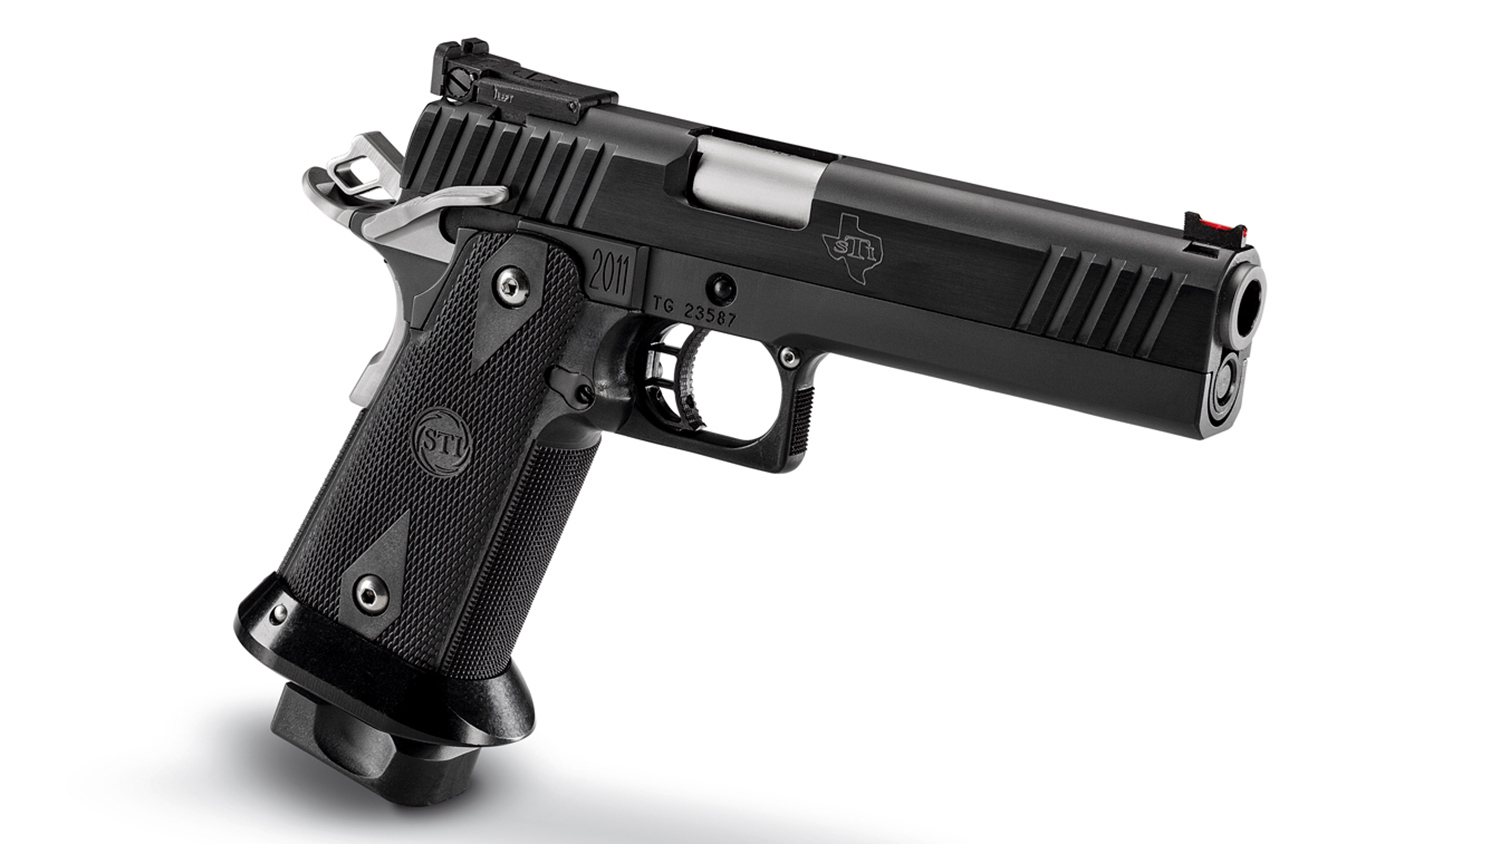 STI 2011 Edge USPSA top choice for Limited and Limited 10